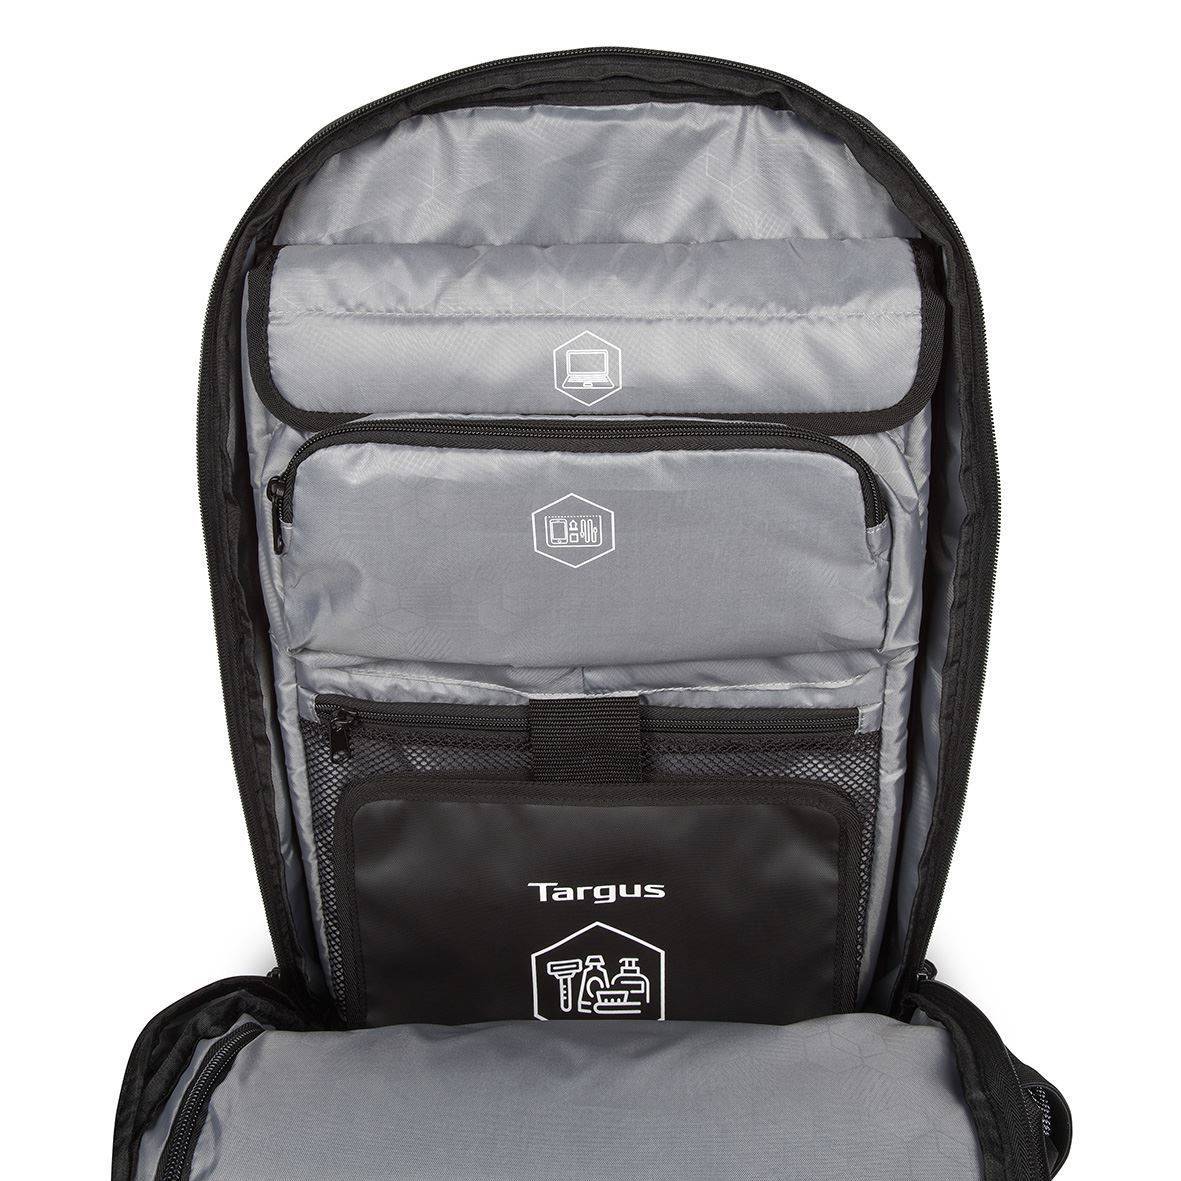 Rca Informatique - image du produit : WORK AND PLAY FITNESS 15.6IN LAPTOP BACKPACK GREY